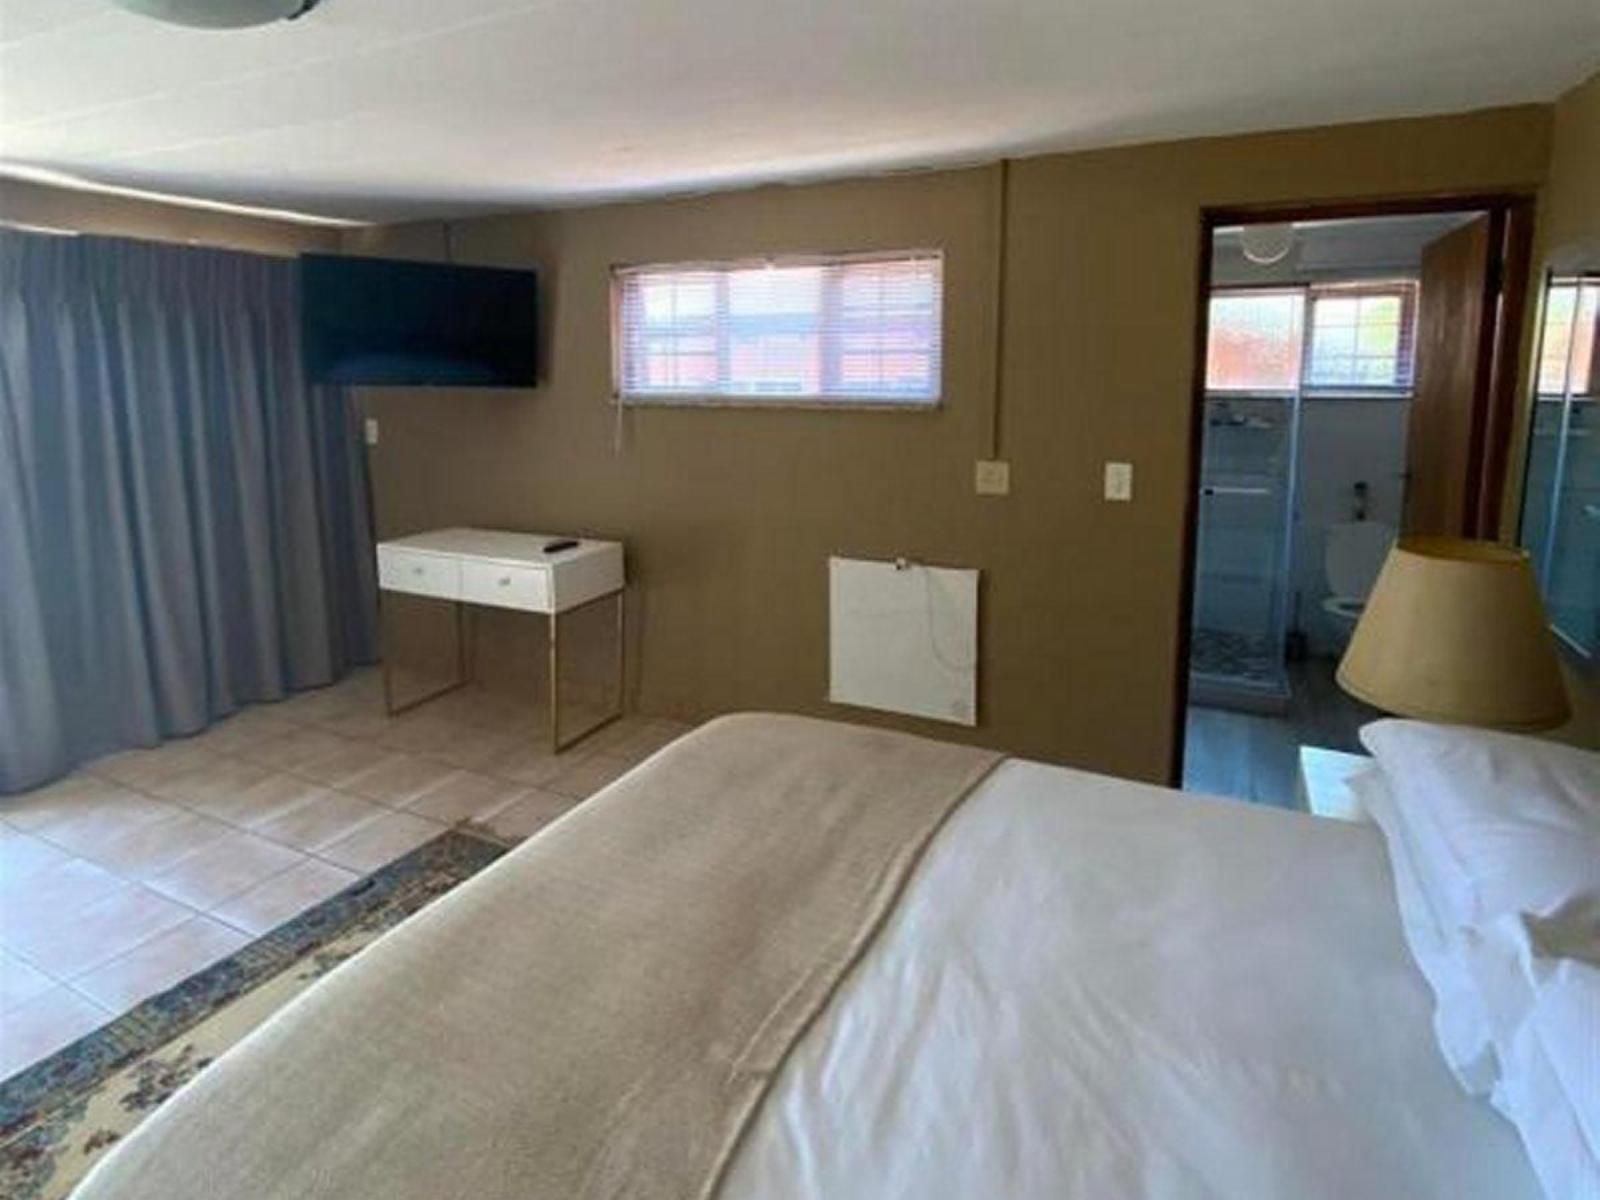 Marina Views Guesthouse Kosmos Hartbeespoort North West Province South Africa Bedroom